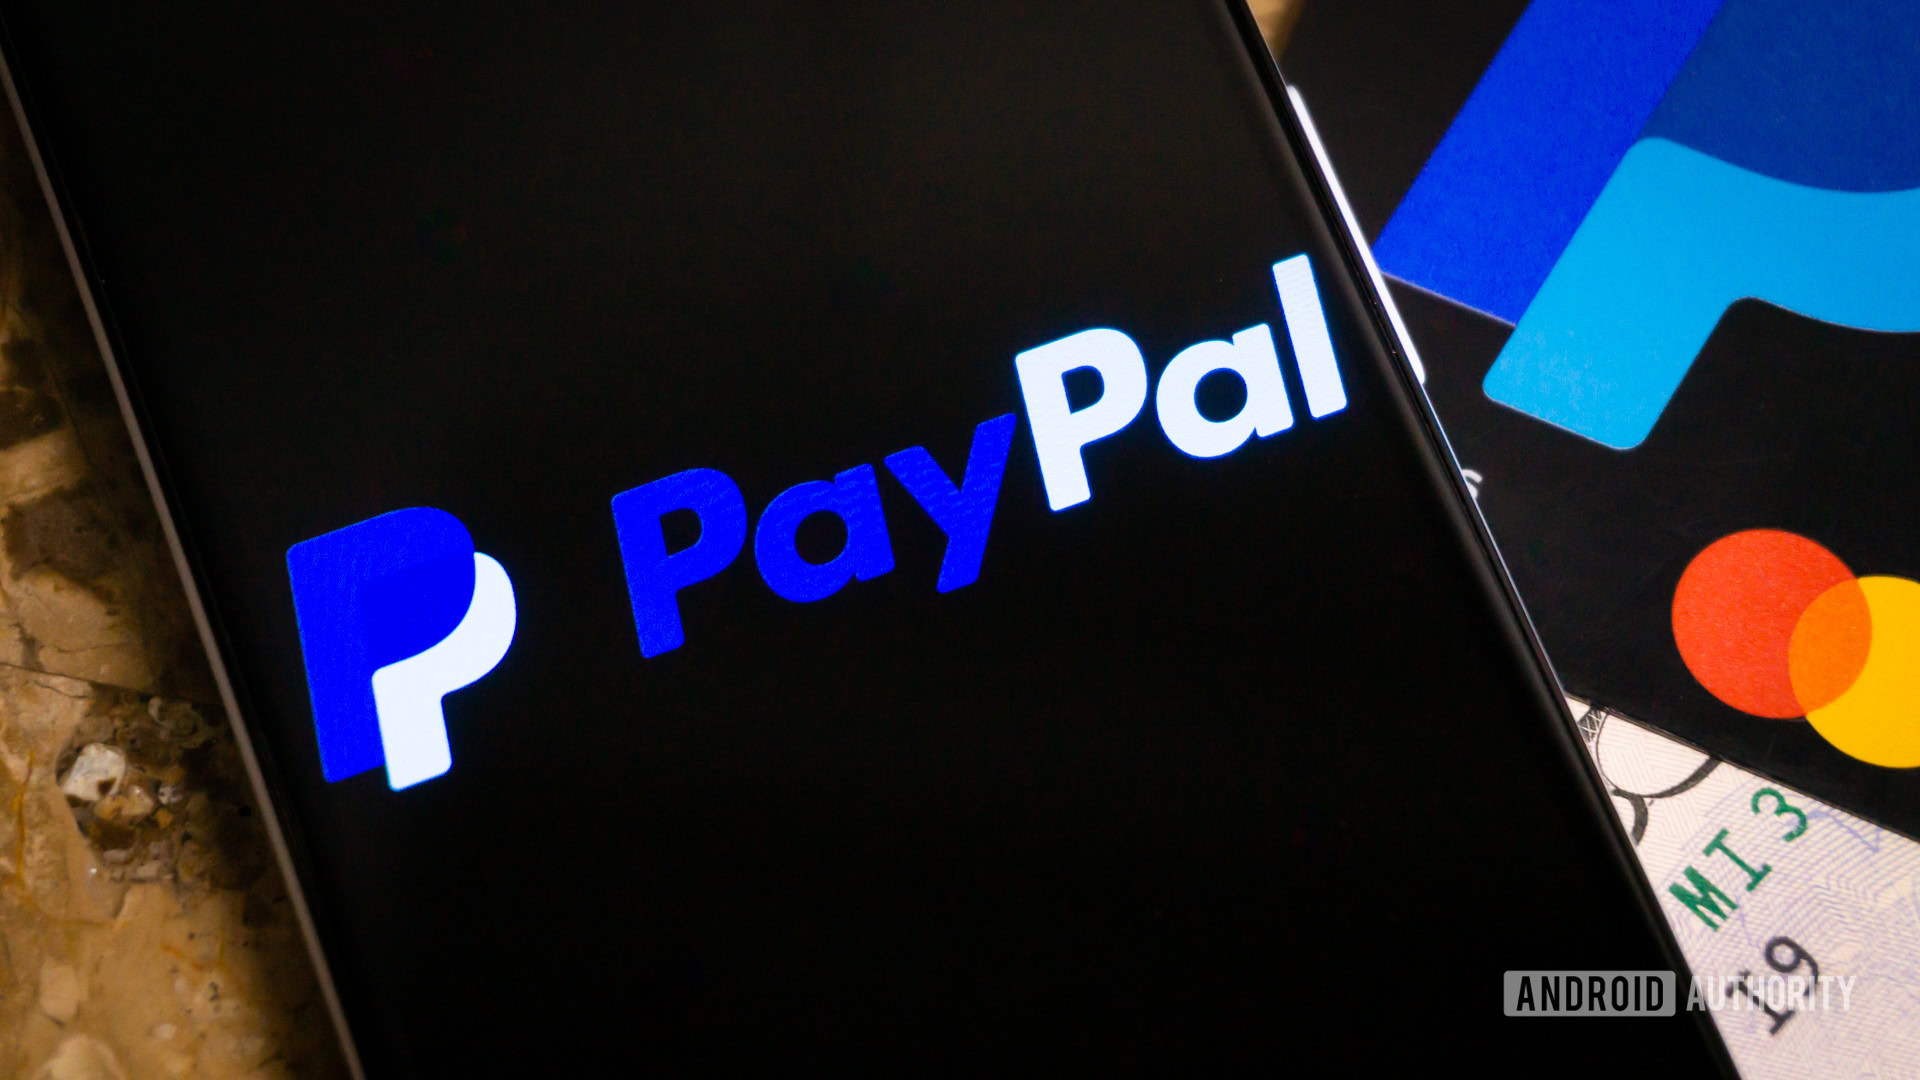 A stock photo of the PayPal logo shown on a smartphone lying on top of a credit card and some cash.